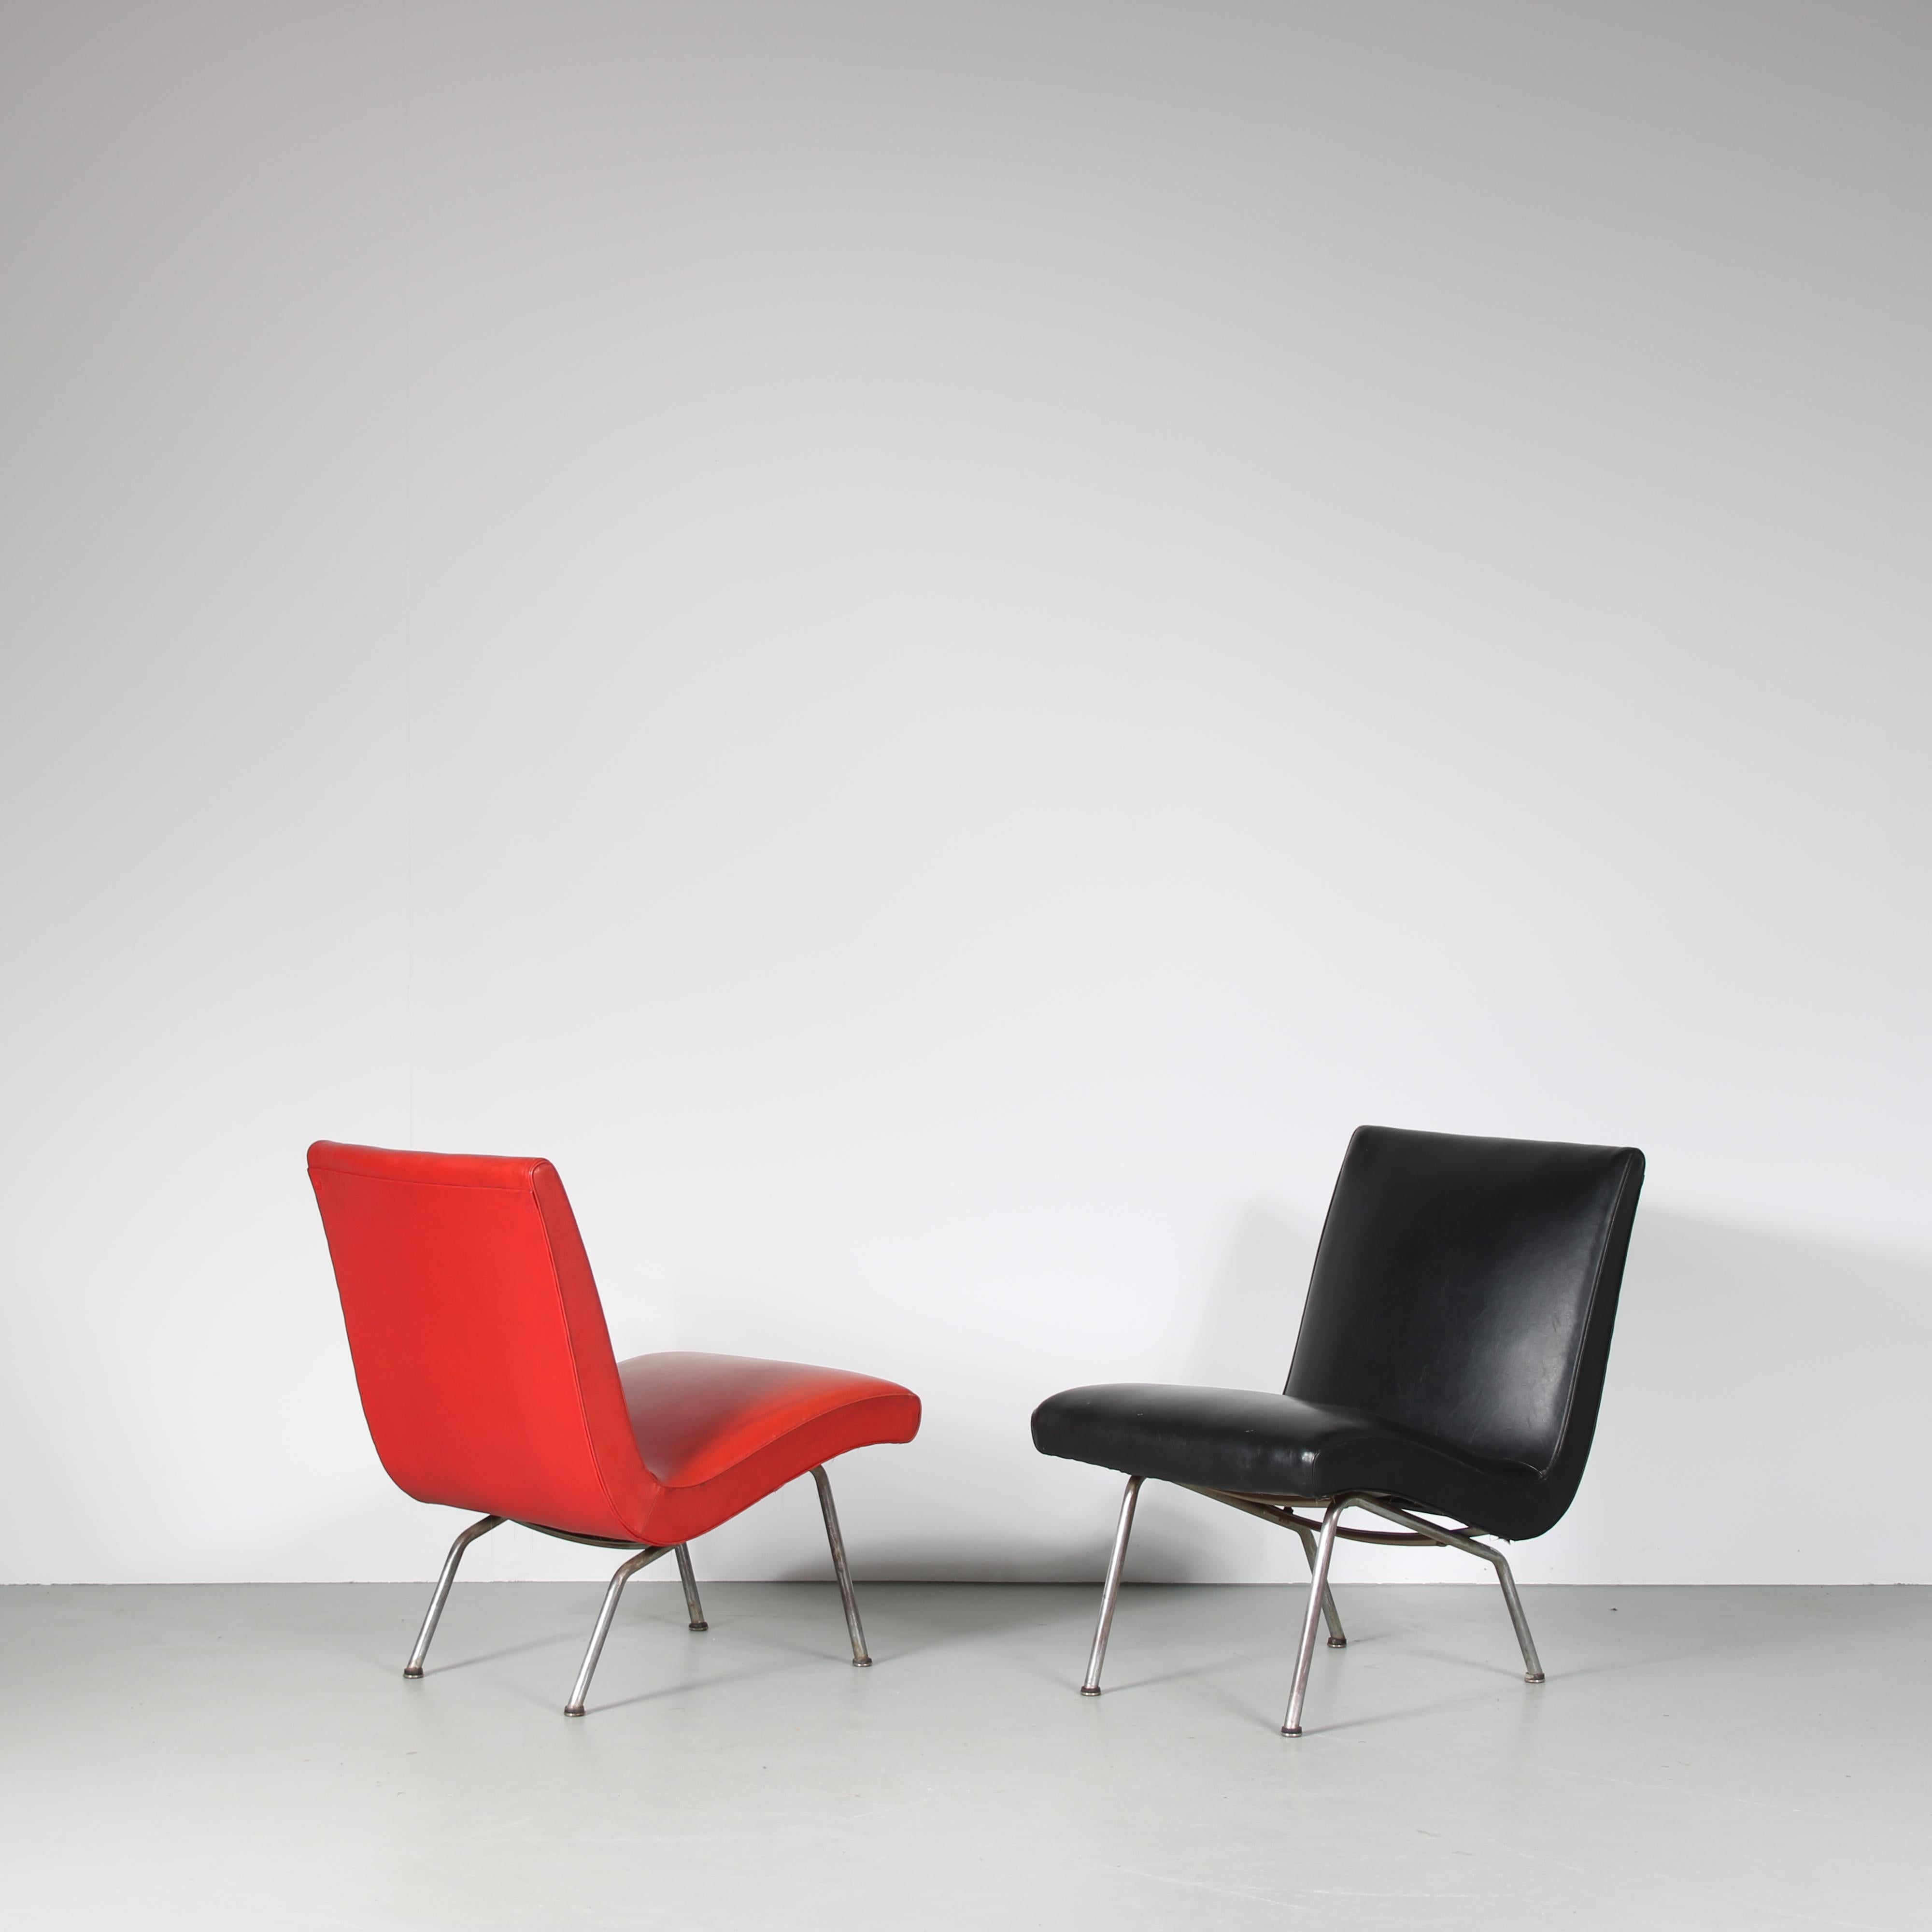 Metal Pair of Walter Knoll “Vostra” Chairs for Knoll, Germany, 1947 For Sale